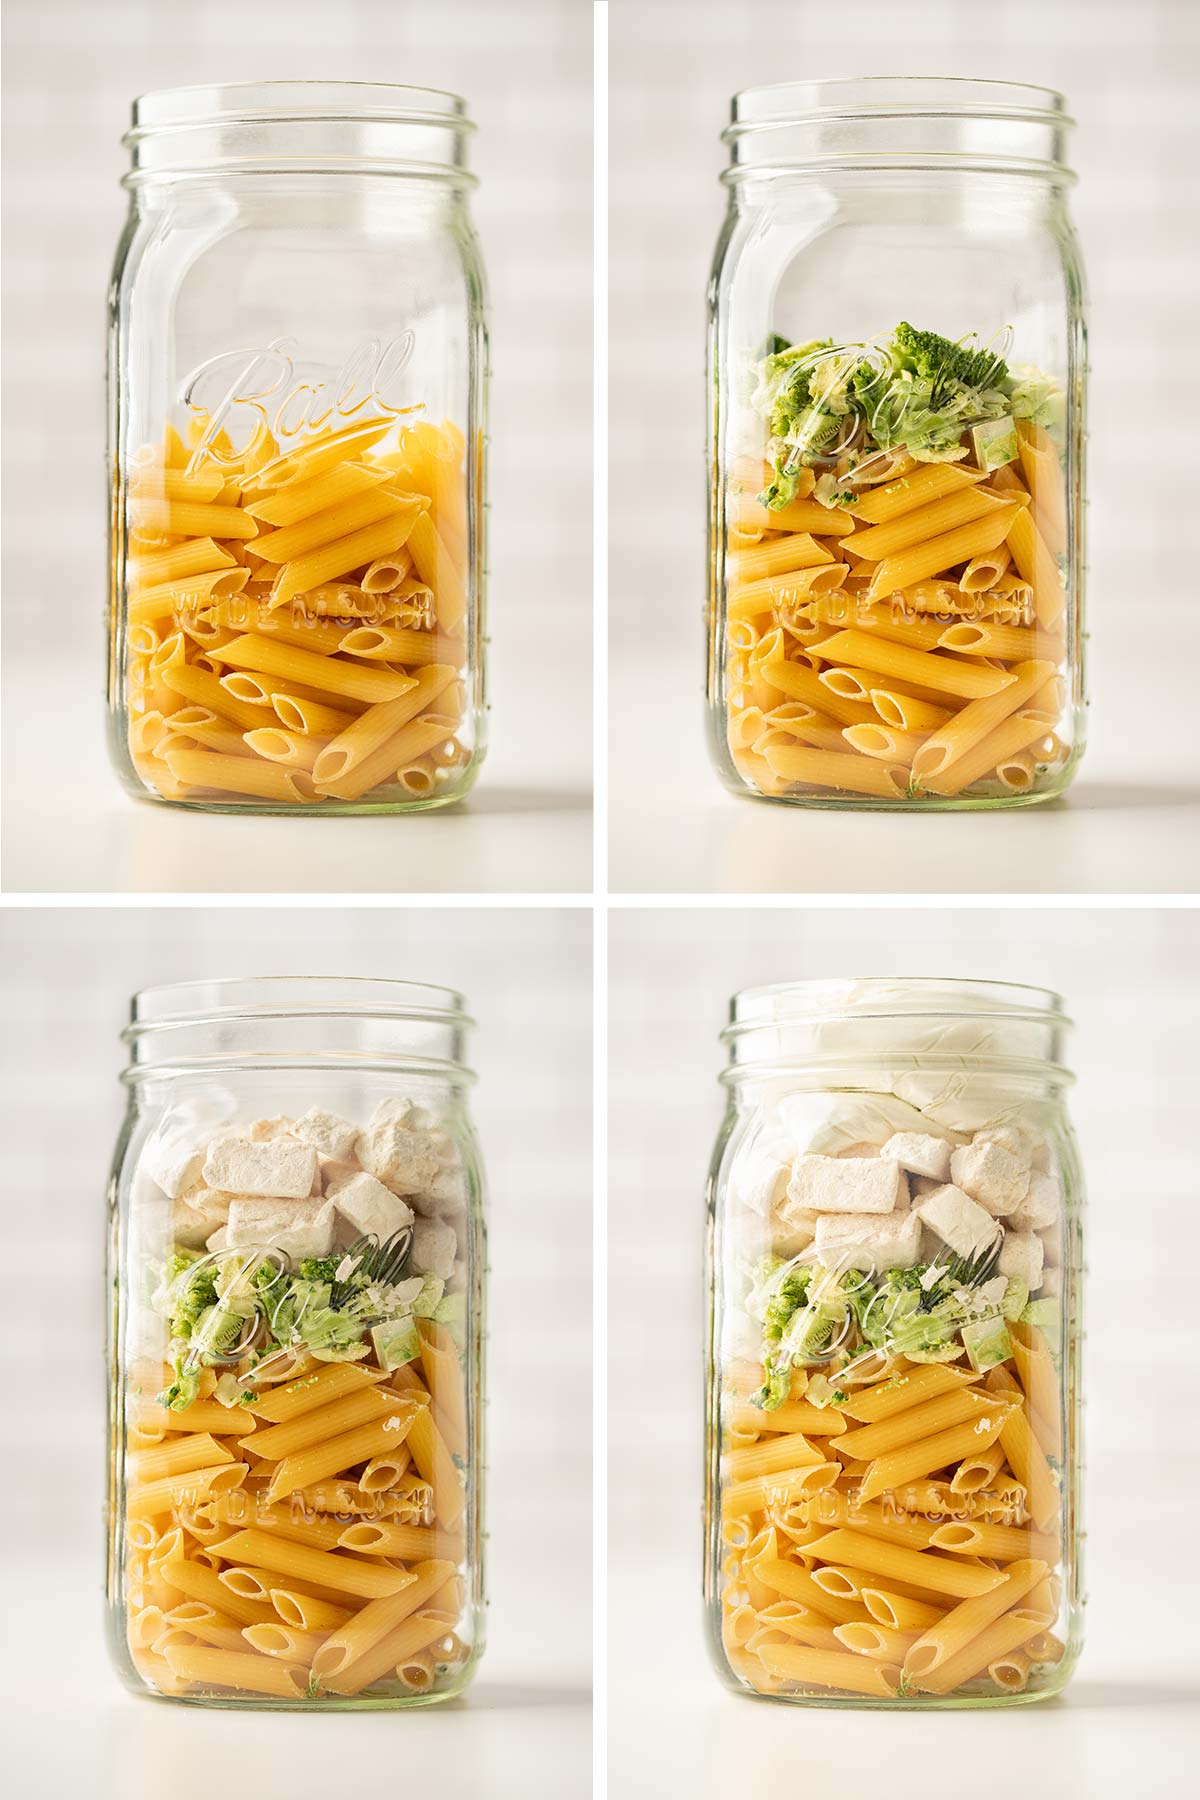 Collage of photos showing the process of adding ingredients for Chicken Broccoli Alfredo Meal in a Jar.